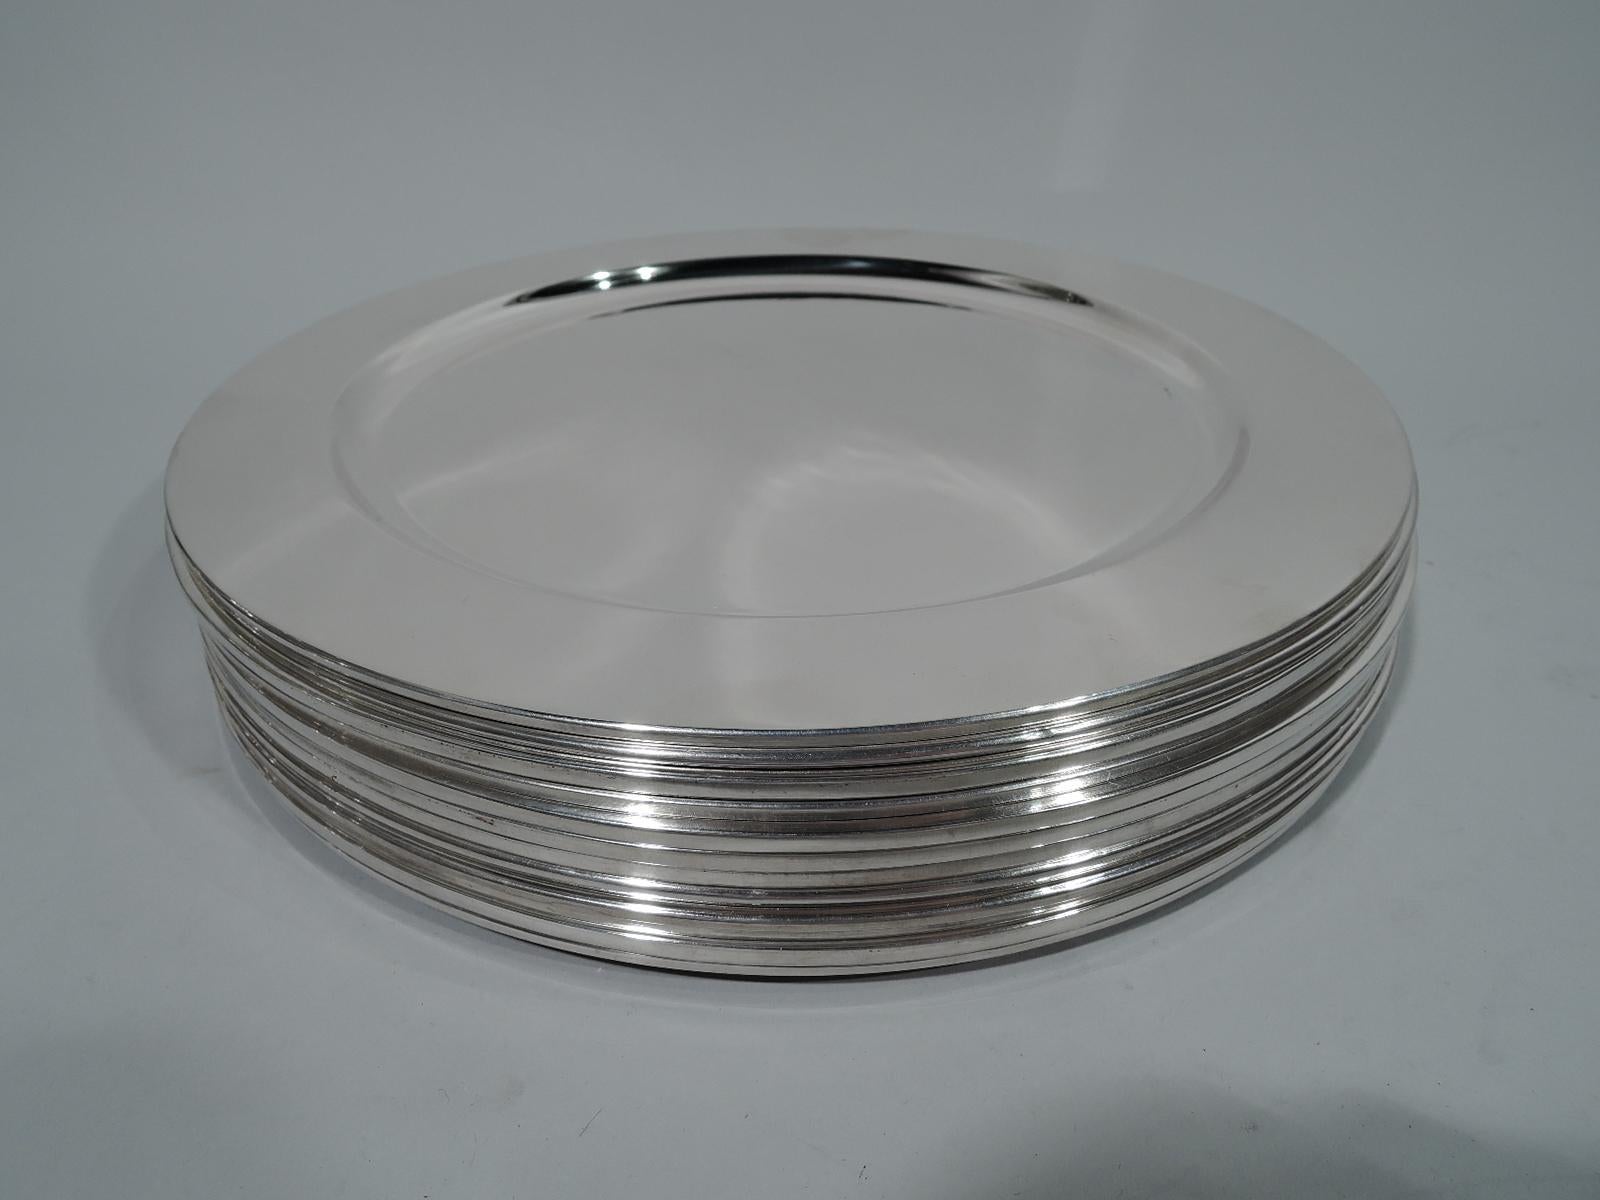 Set of 24 modern sterling silver plates. This set comprises 12 dinner plates and 12 bread-and-butter plates: Each: Well with wide and flat shoulder. Spare and functional with well-defined form. Mexican hallmarks with 1960s-1970s eagle stamp.